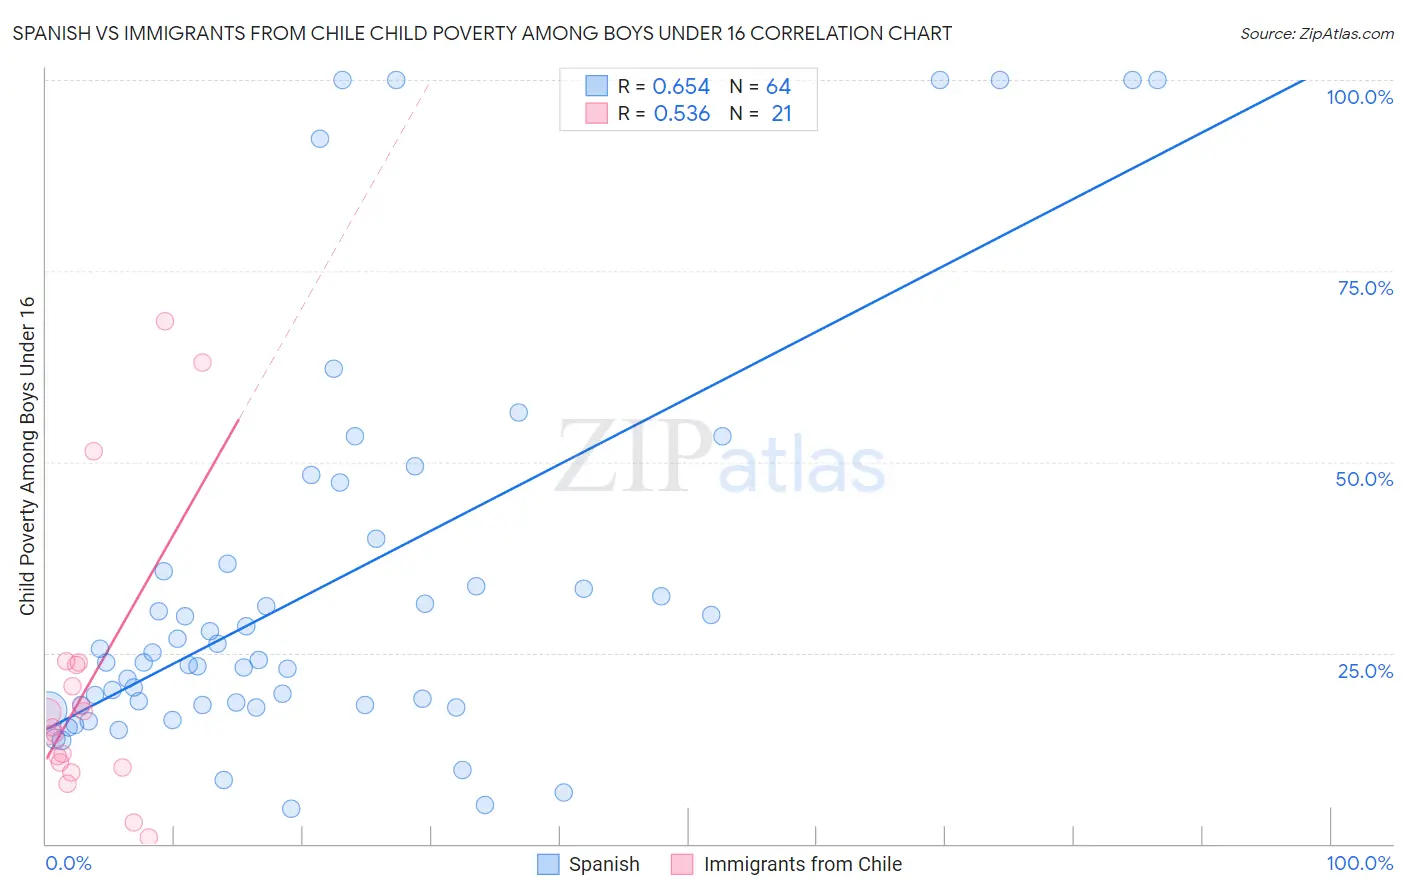 Spanish vs Immigrants from Chile Child Poverty Among Boys Under 16